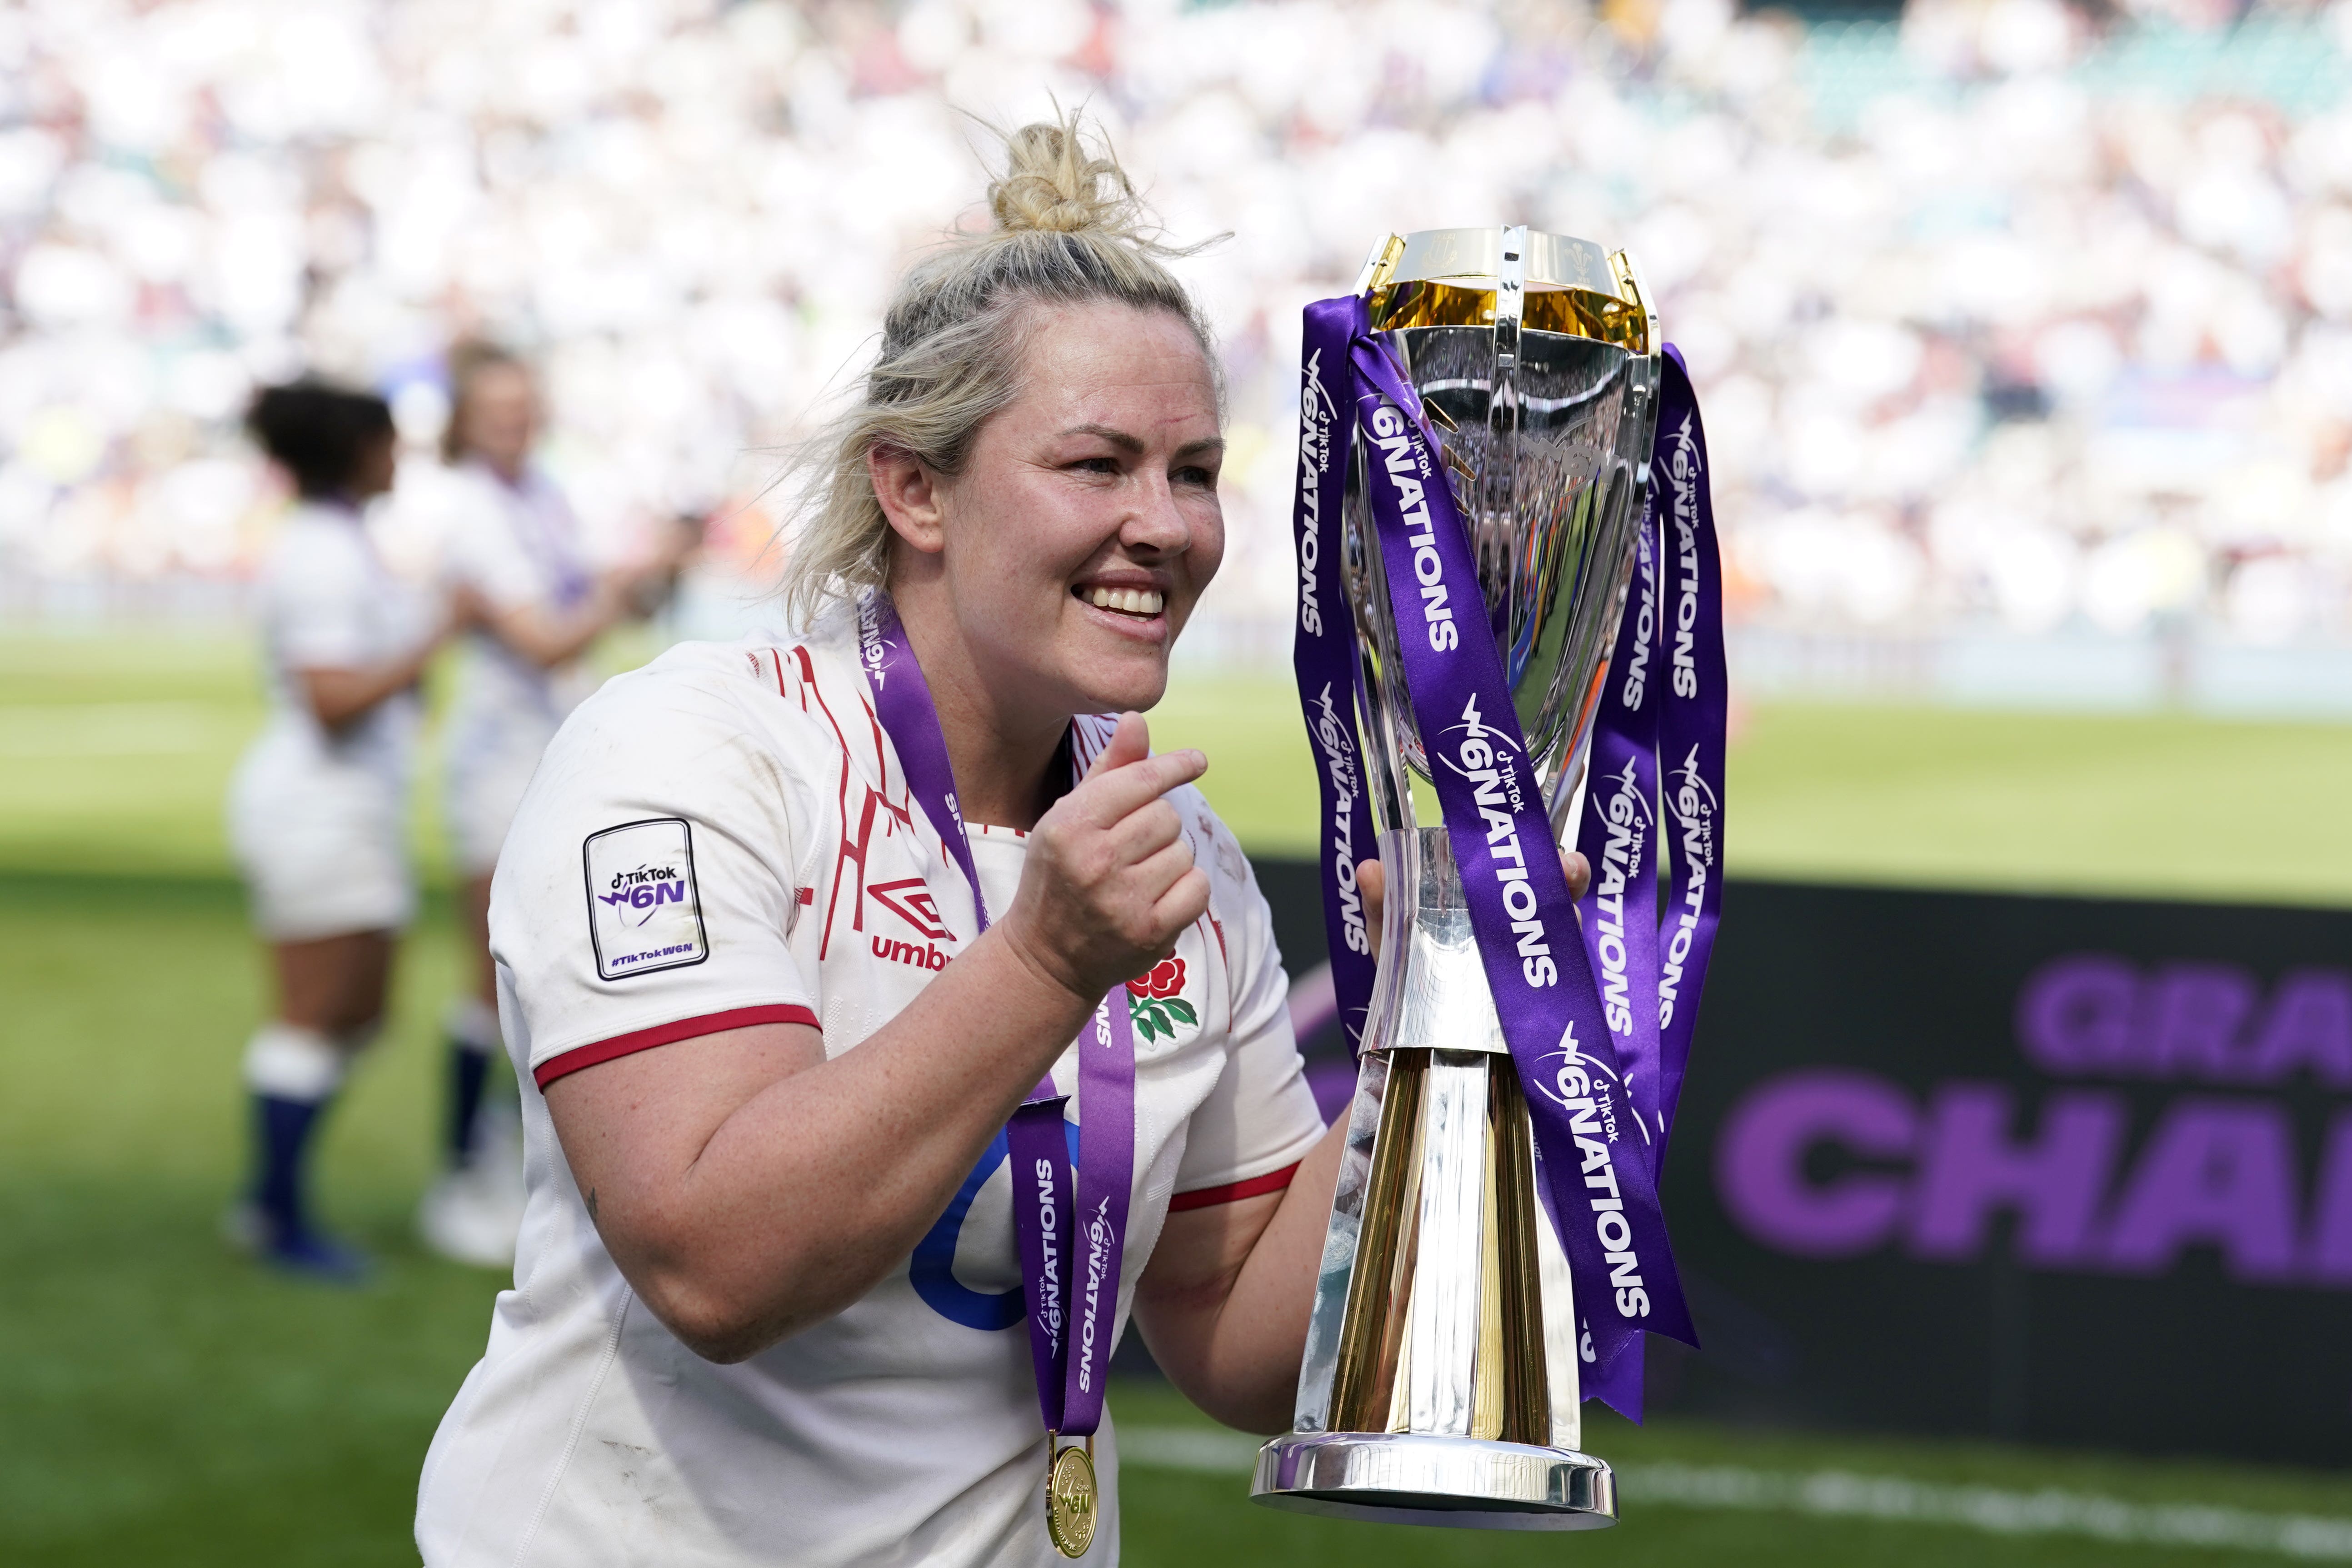 Marlie Packer captained England to Women’s Six Nations victory at Twickenham last year